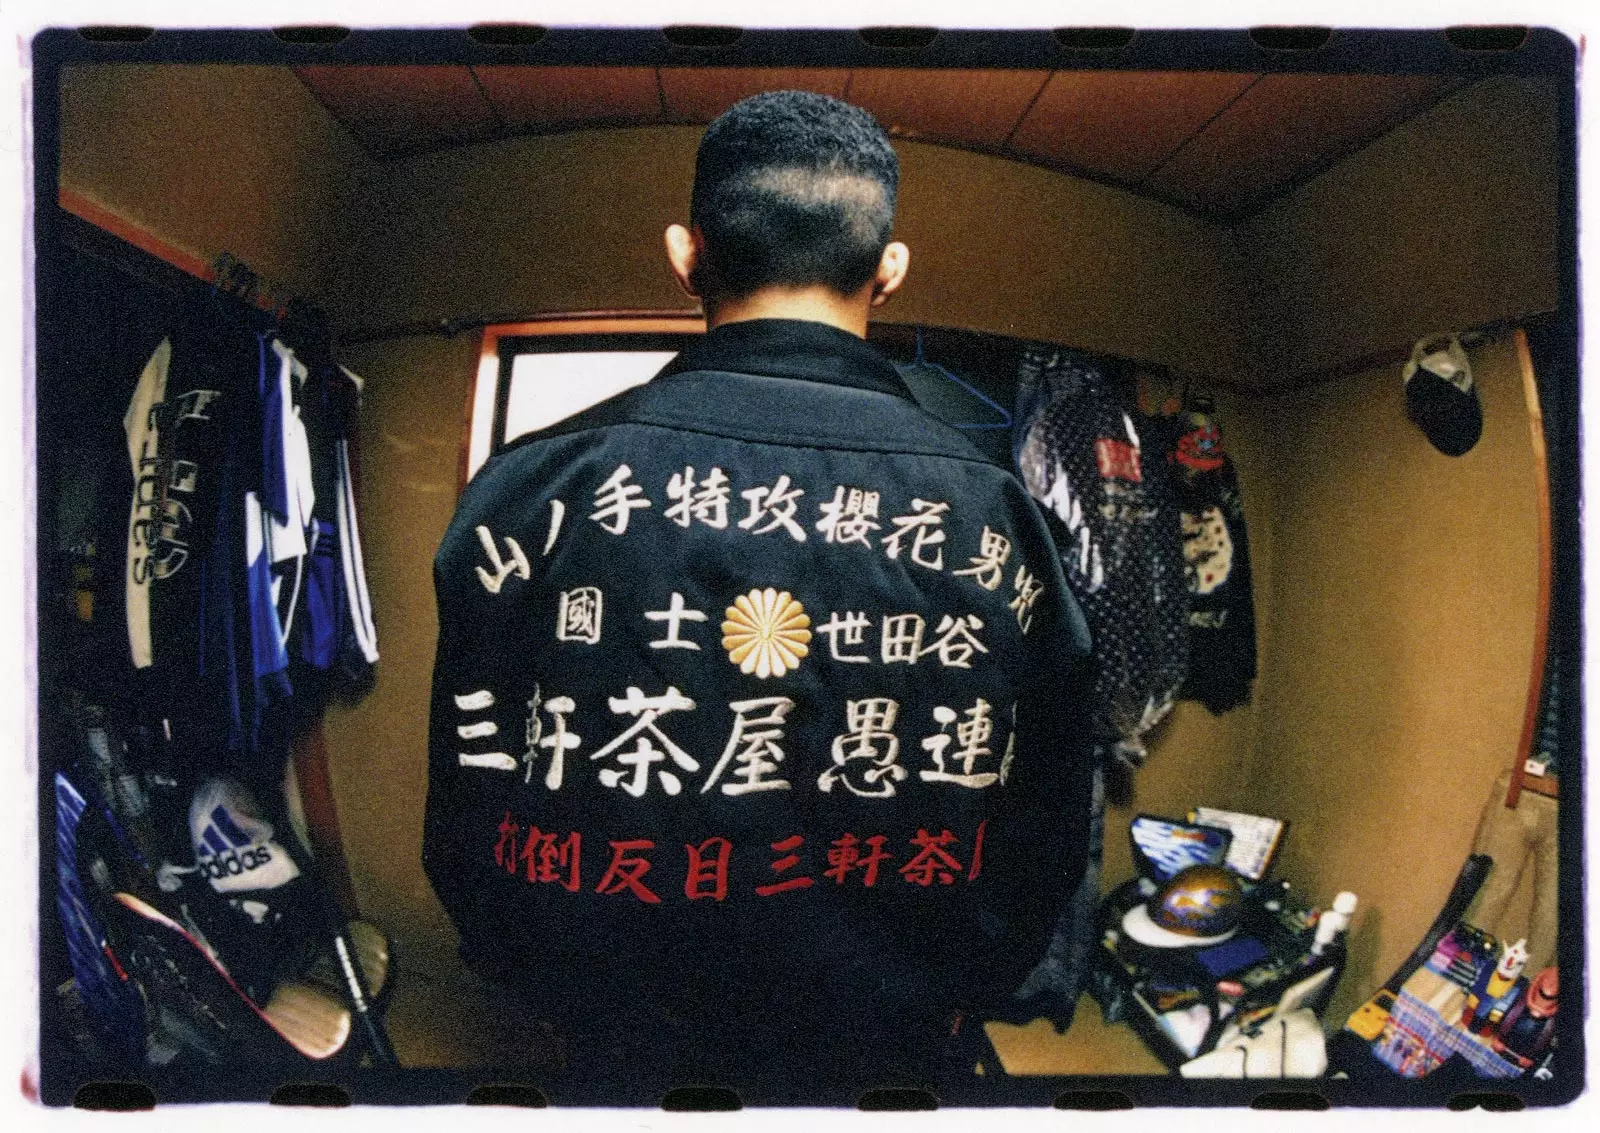 bosozoku-the-stylish-legacy-of-japans-rebel-motorcycle-gangs-8.png